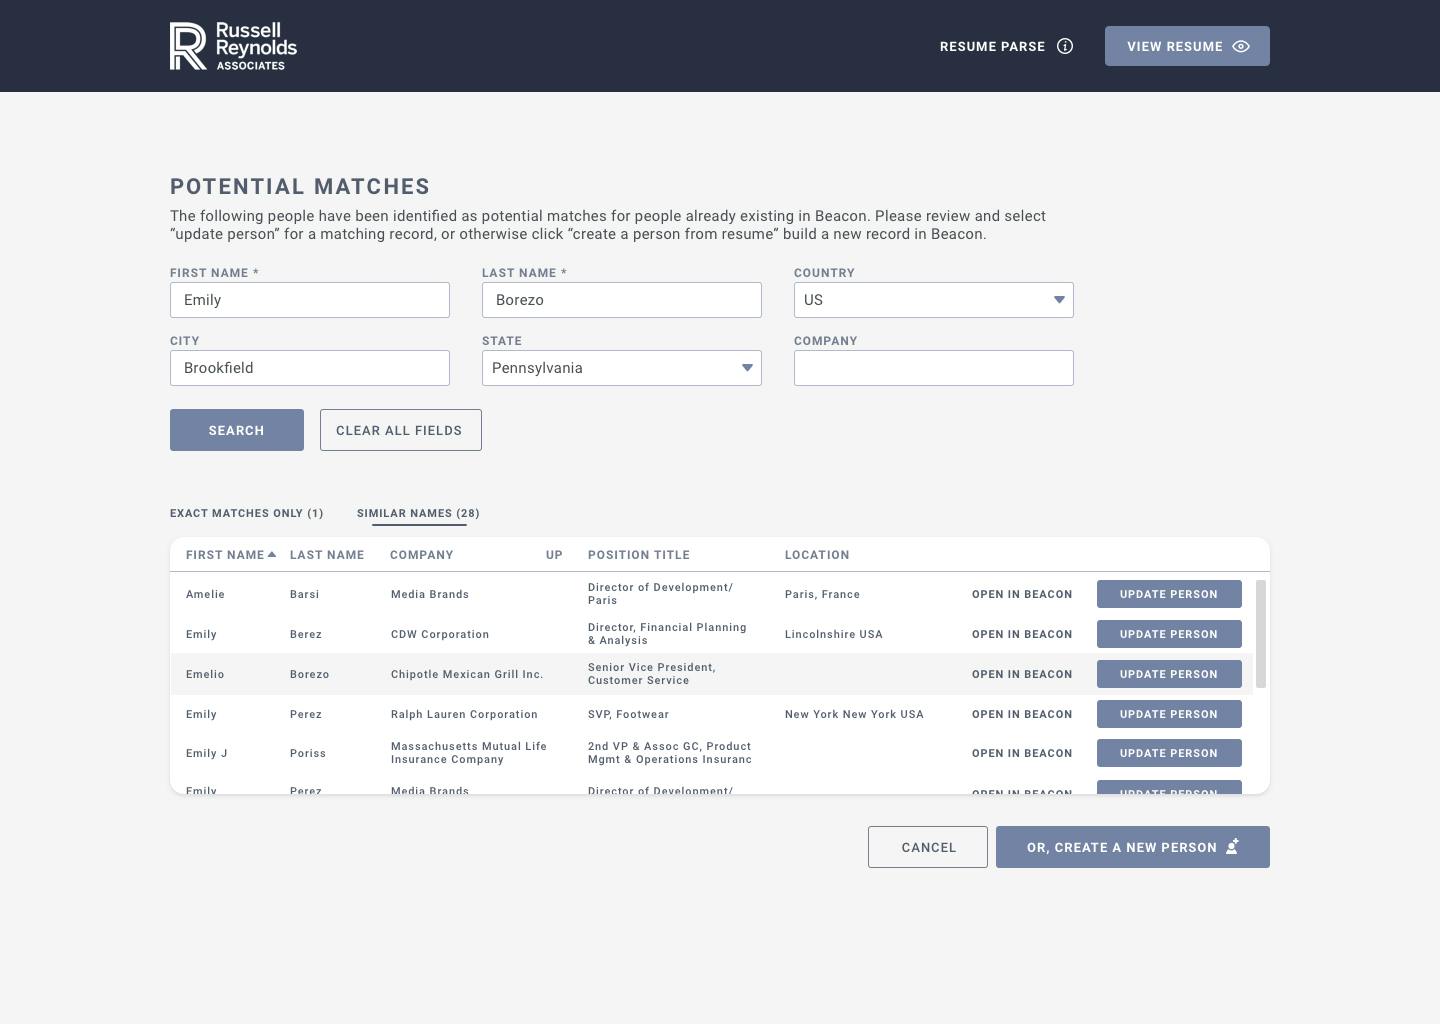 A screen from the Russell Reynolds Resume Parse Tool